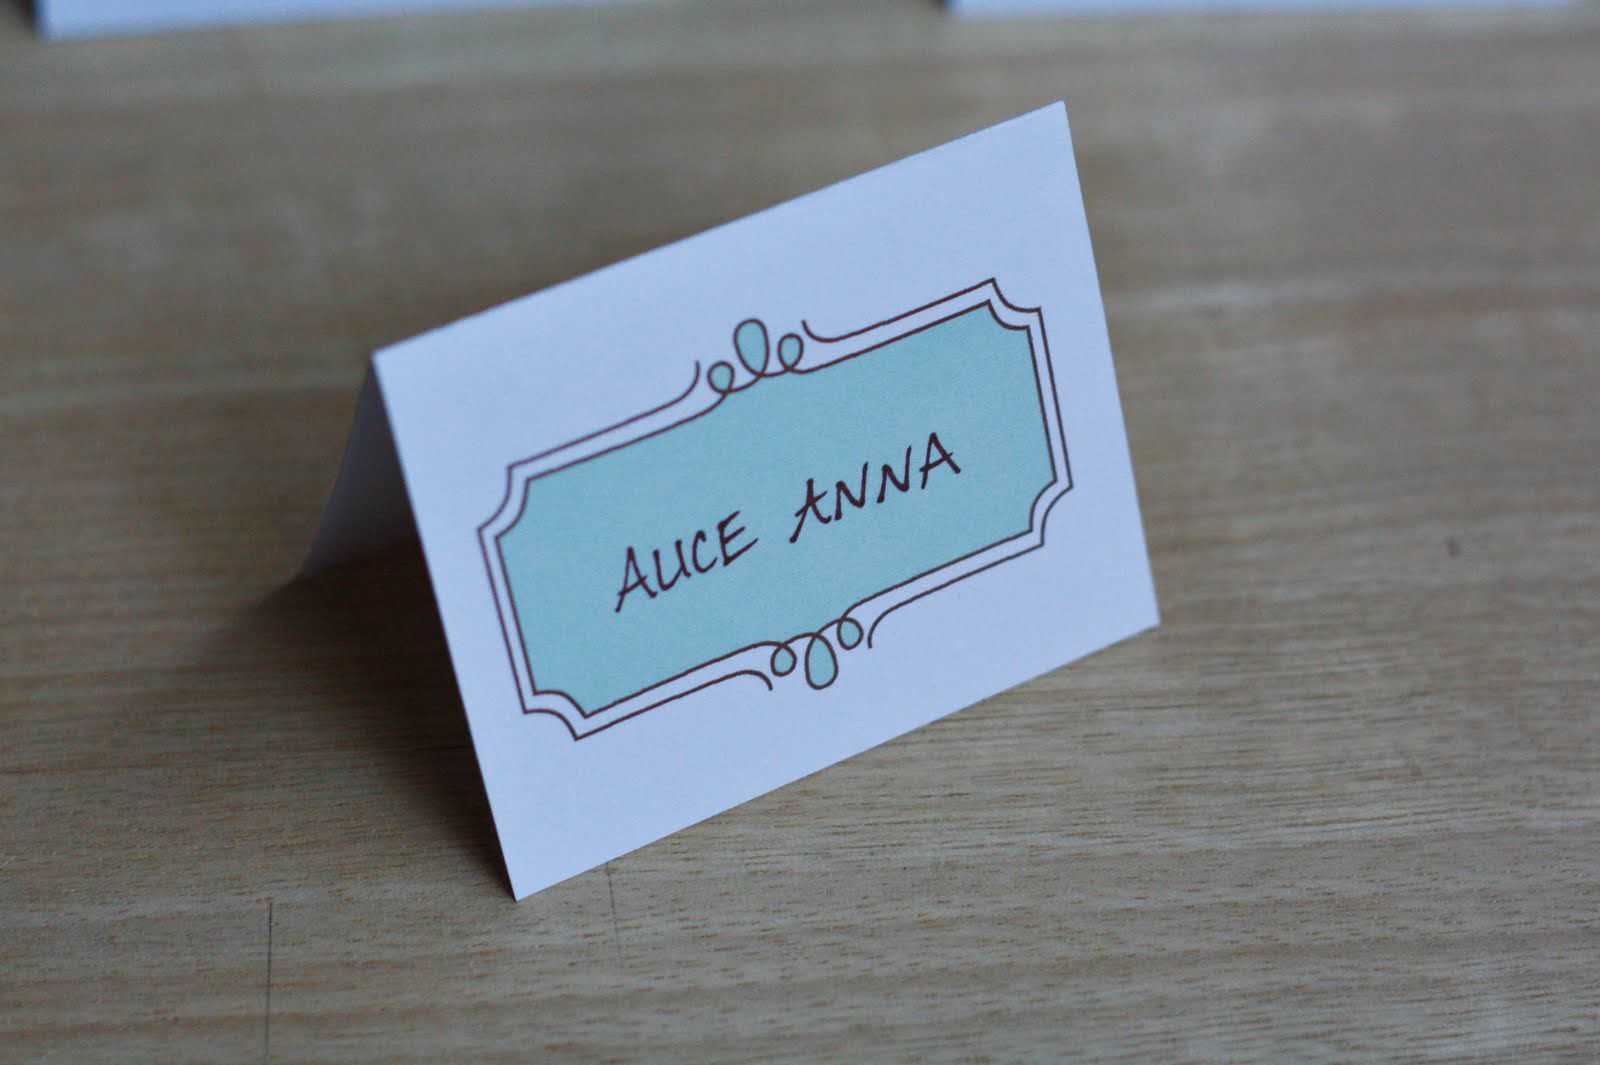 8 Free Wedding Place Card Templates With Place Card Template 6 Per Sheet